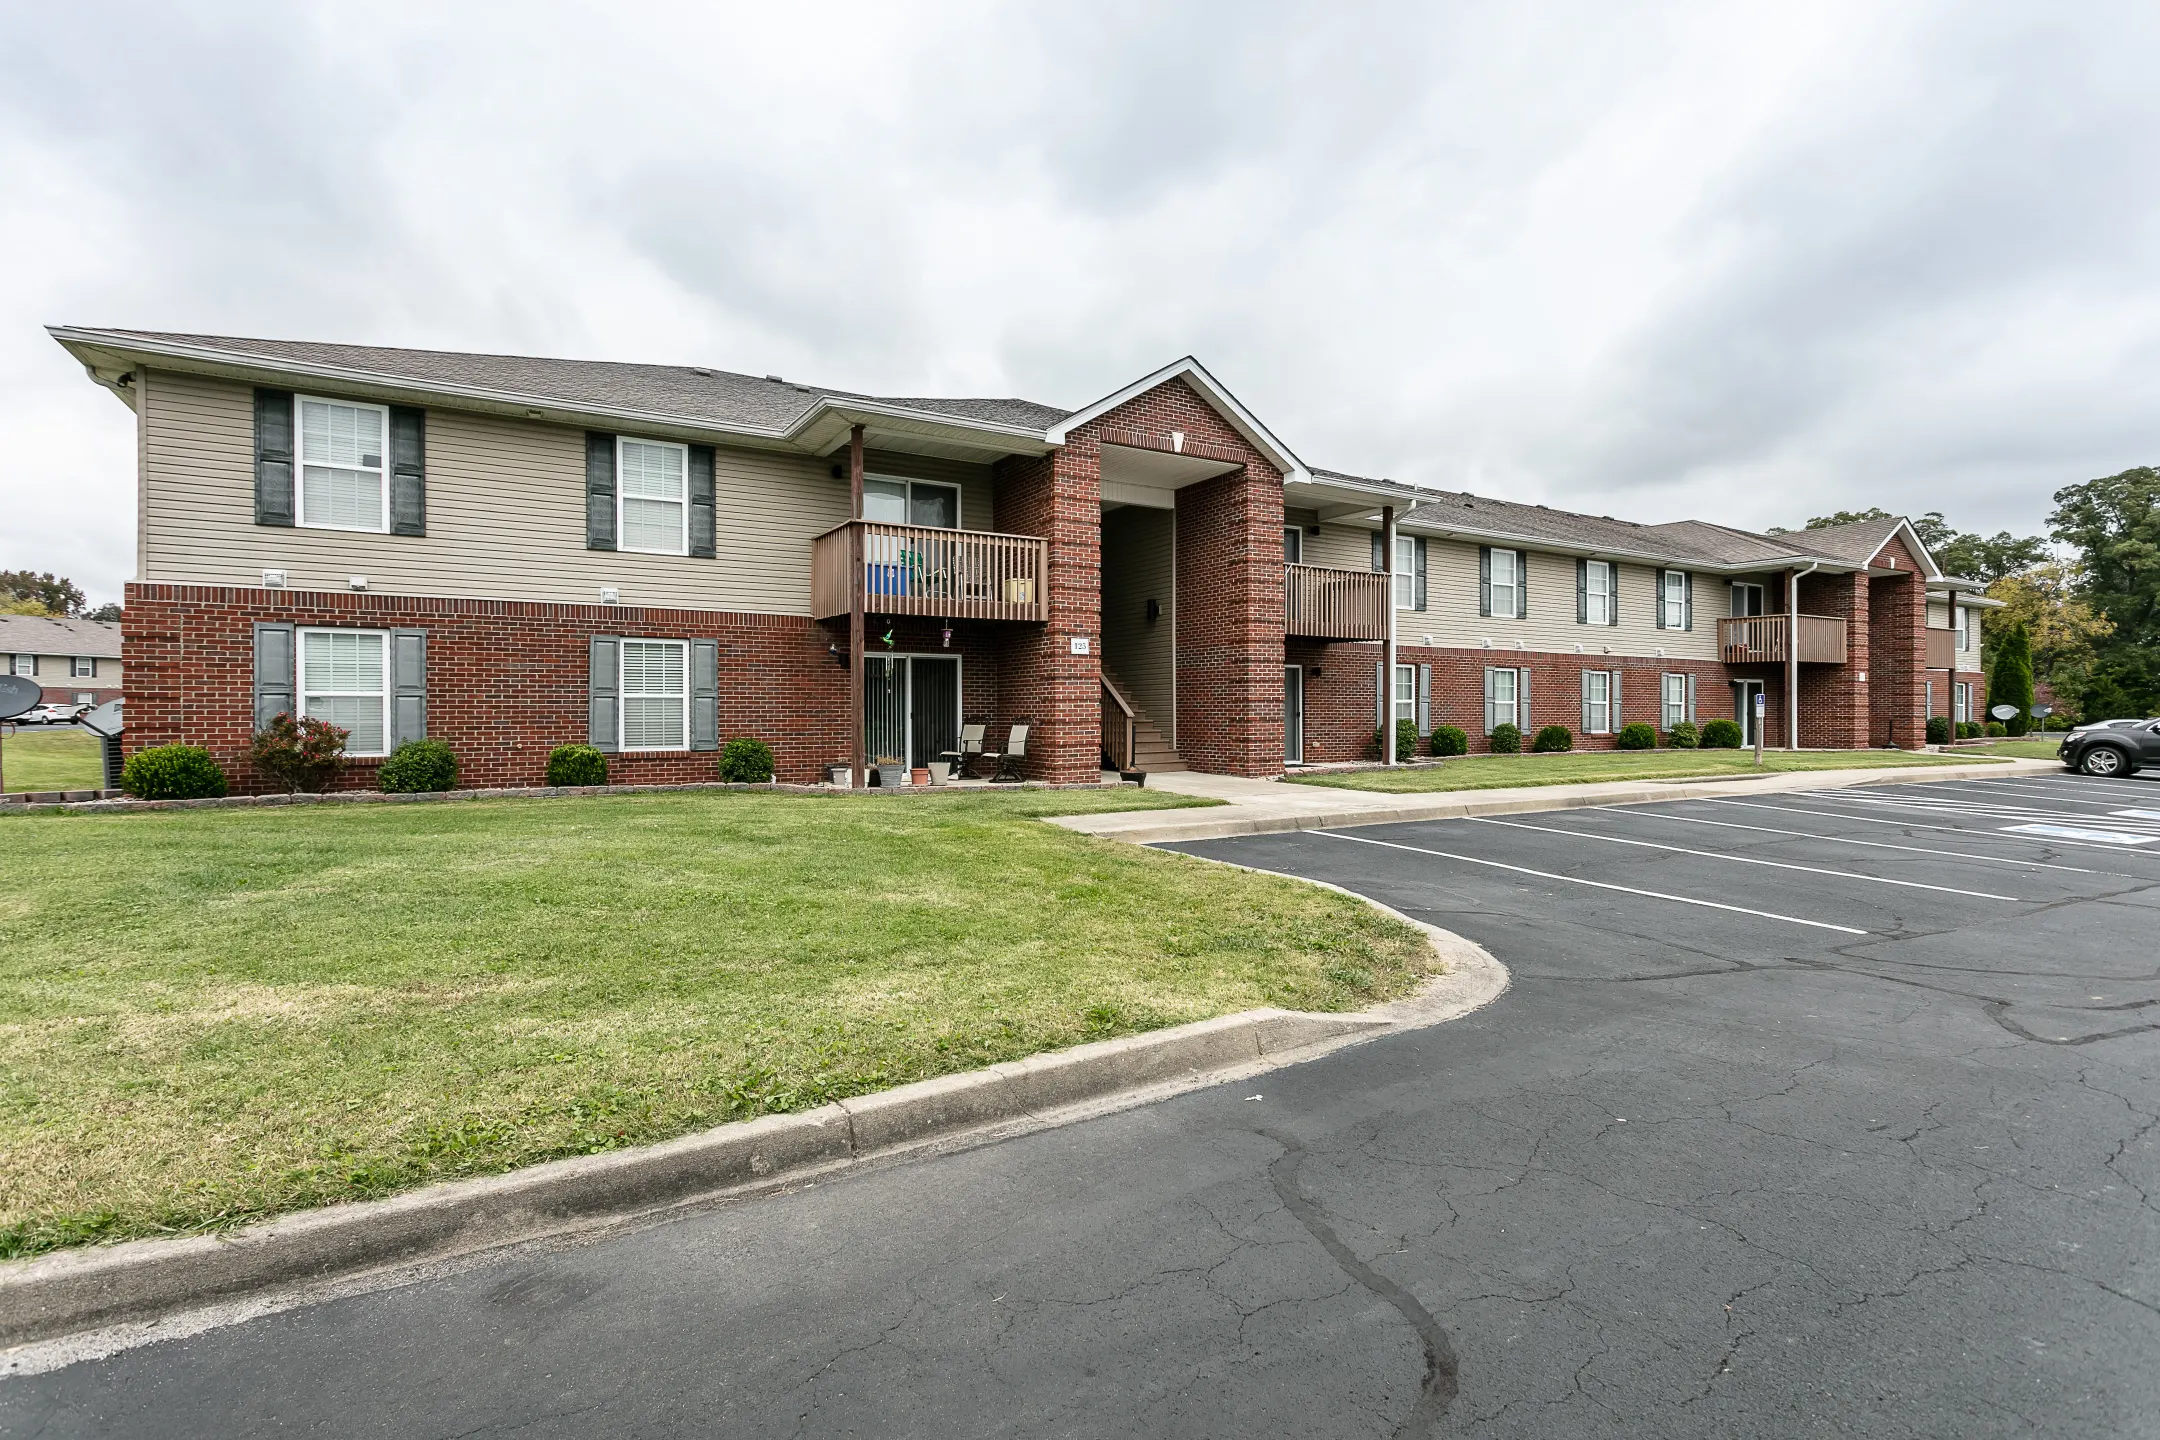 Building - Polo Springs Apartments - Bardstown, KY